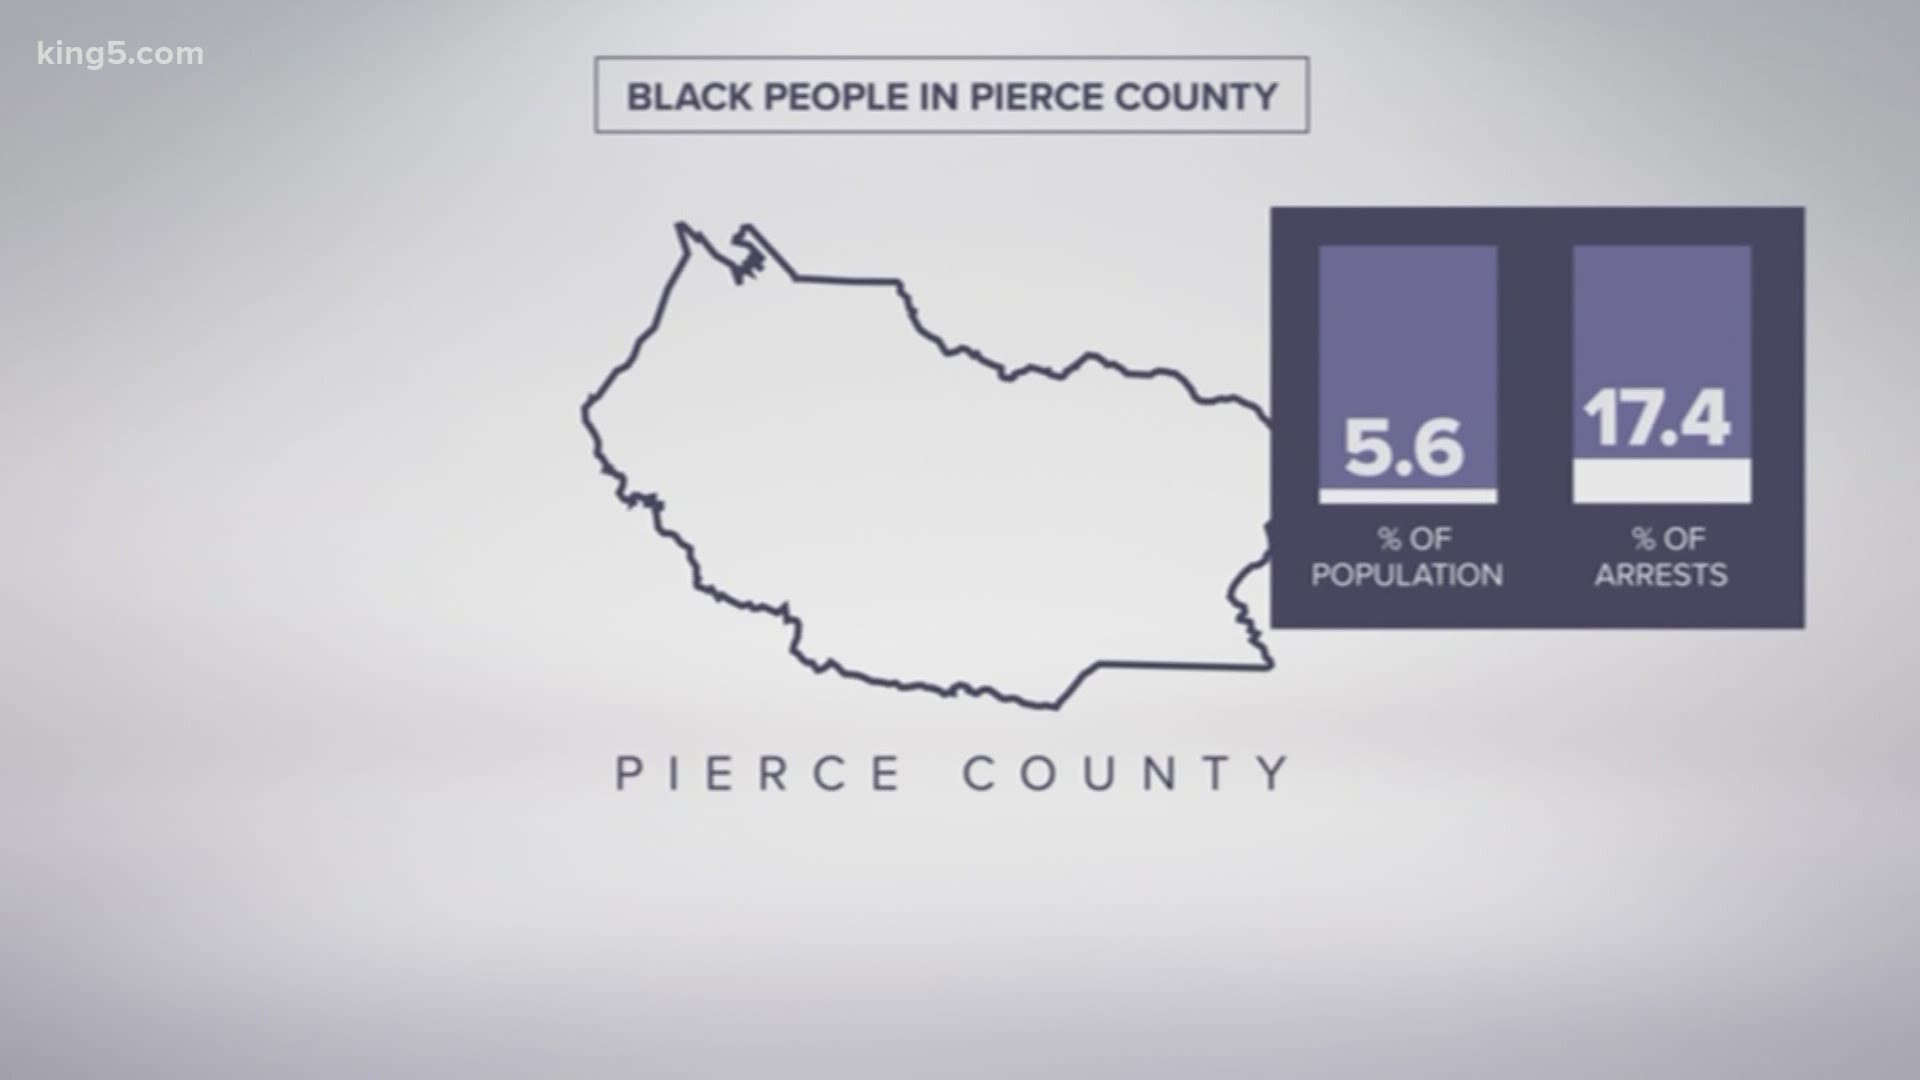 A report presented to Pierce County Council last week found African Americans were arrested at higher rates than any other ethnic group in the county.